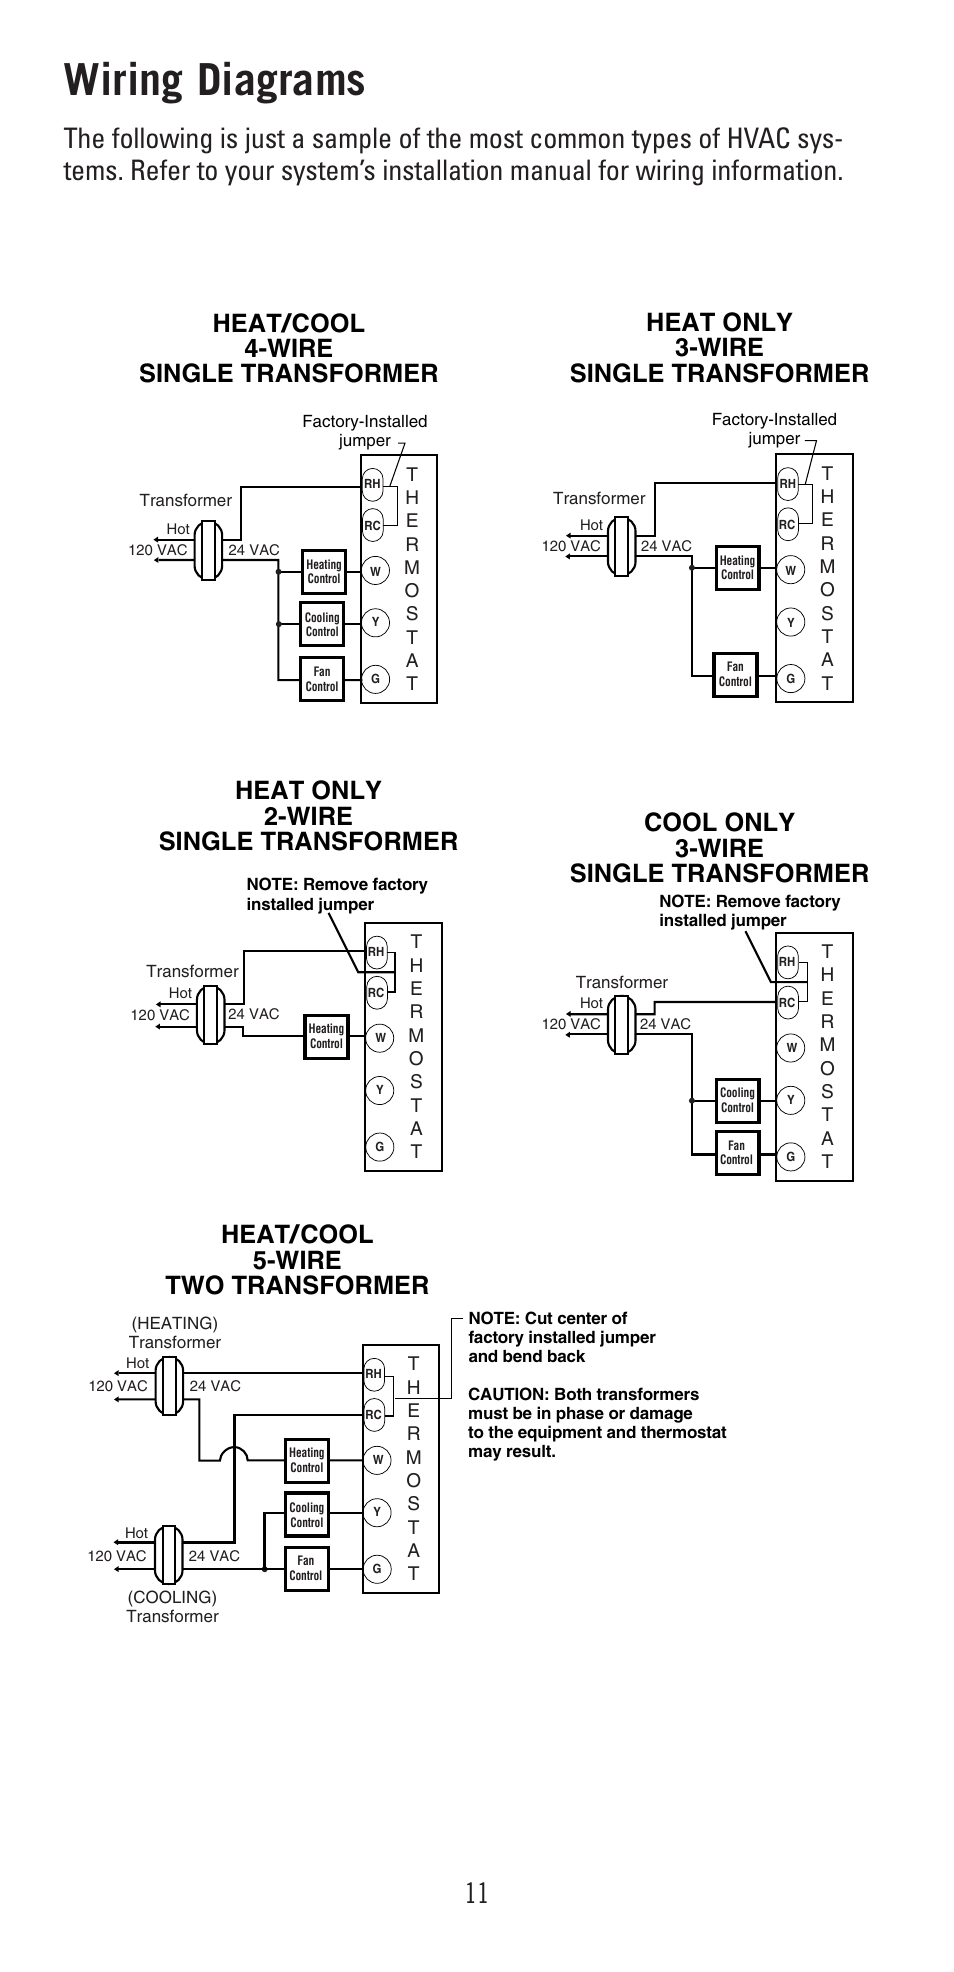 User's manual of Robertshaw Thermostat Wiring Diagram Gallery User's